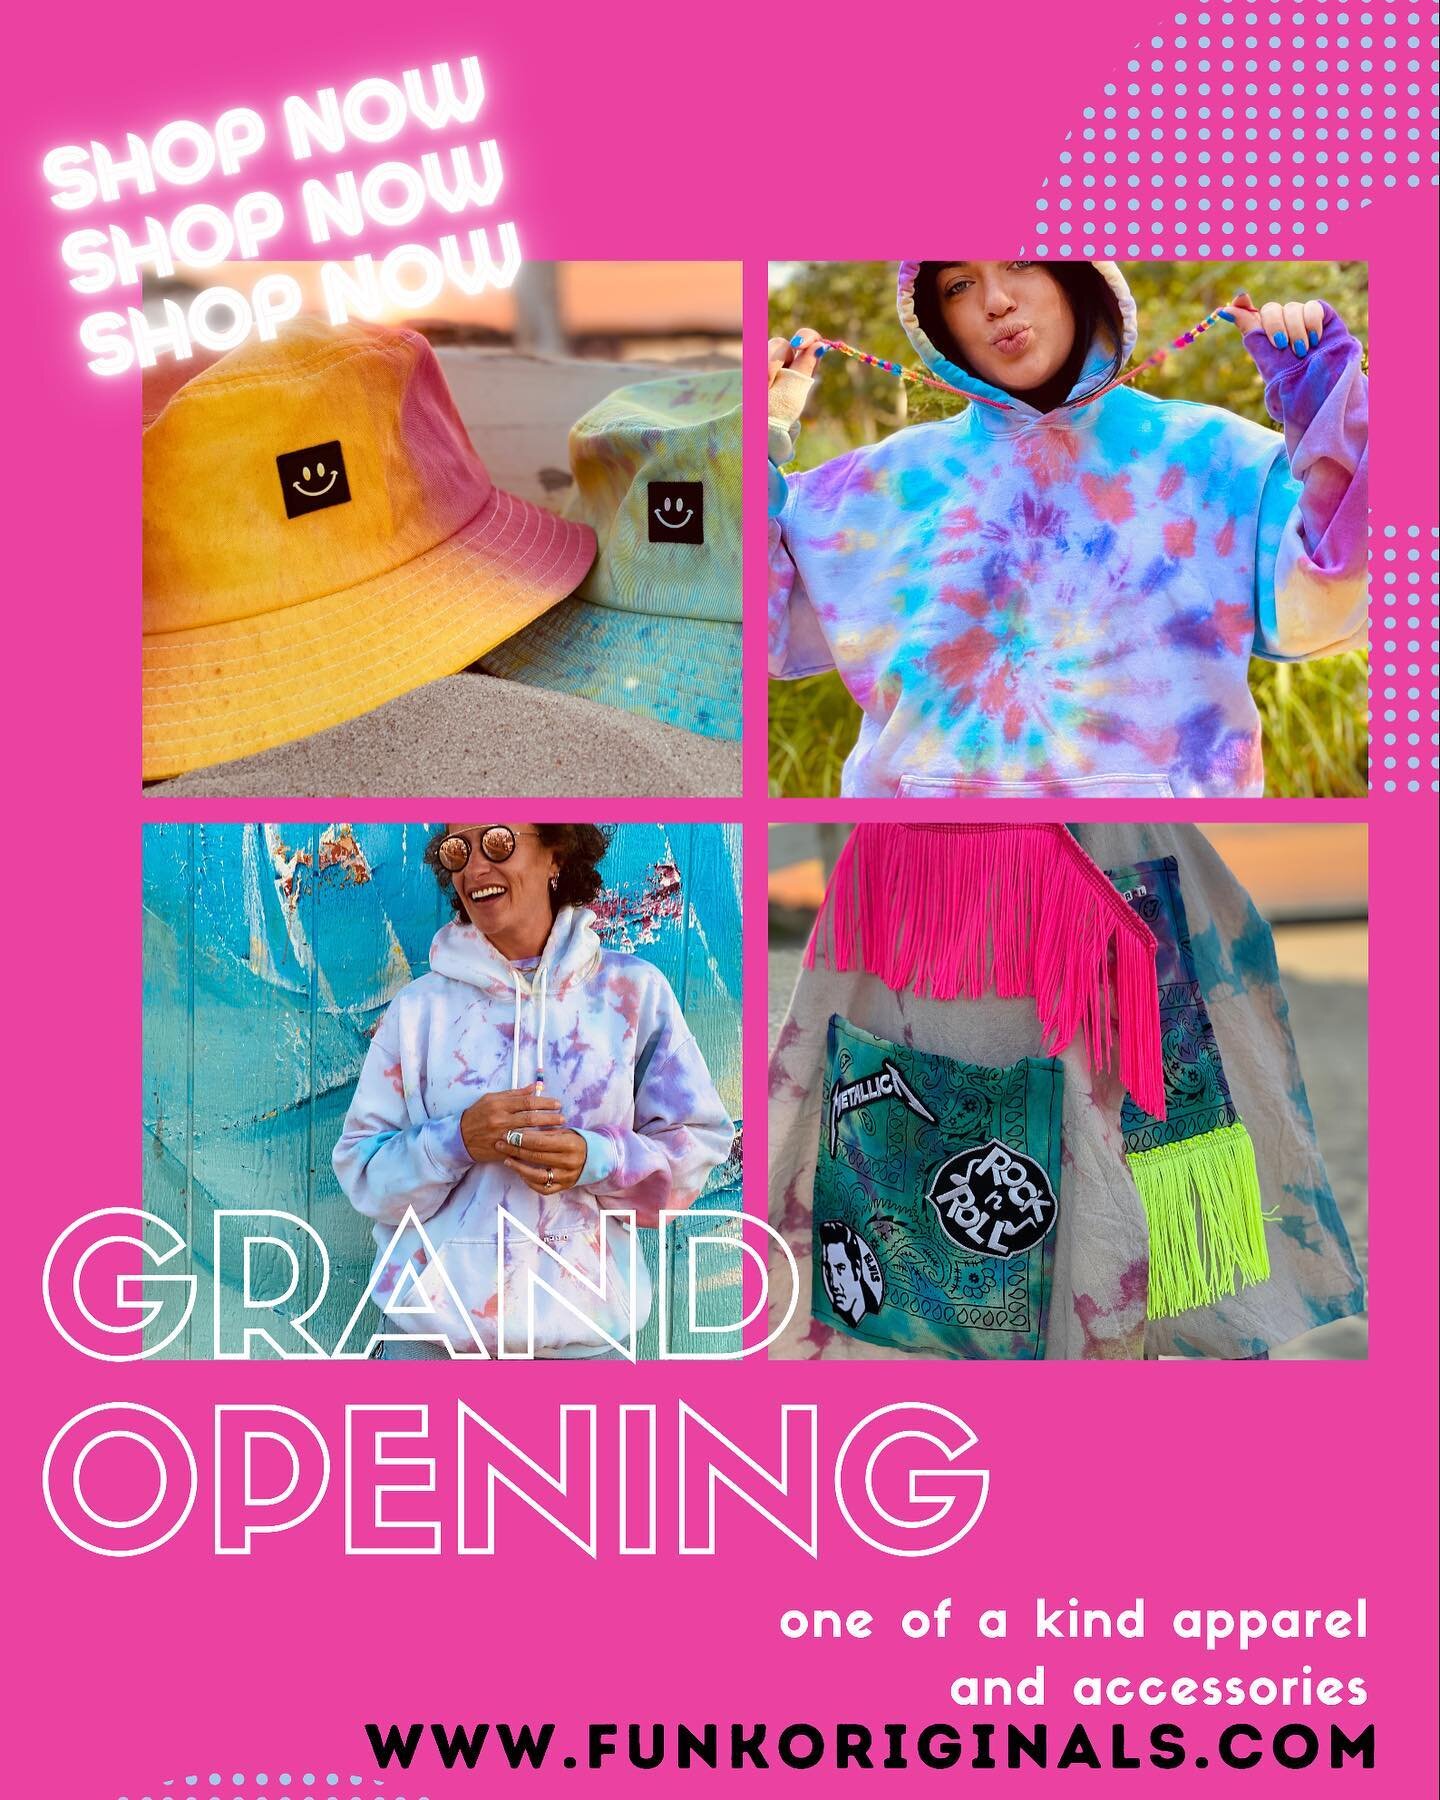 Funk Bus is thrilled to announce the grand opening of Funk Originals, the one of a kind apparel and accessory line that started out of the back of the bus! Shop the complete collection www.funkoriginals.com and be sure to follow @funkoriginals to cat